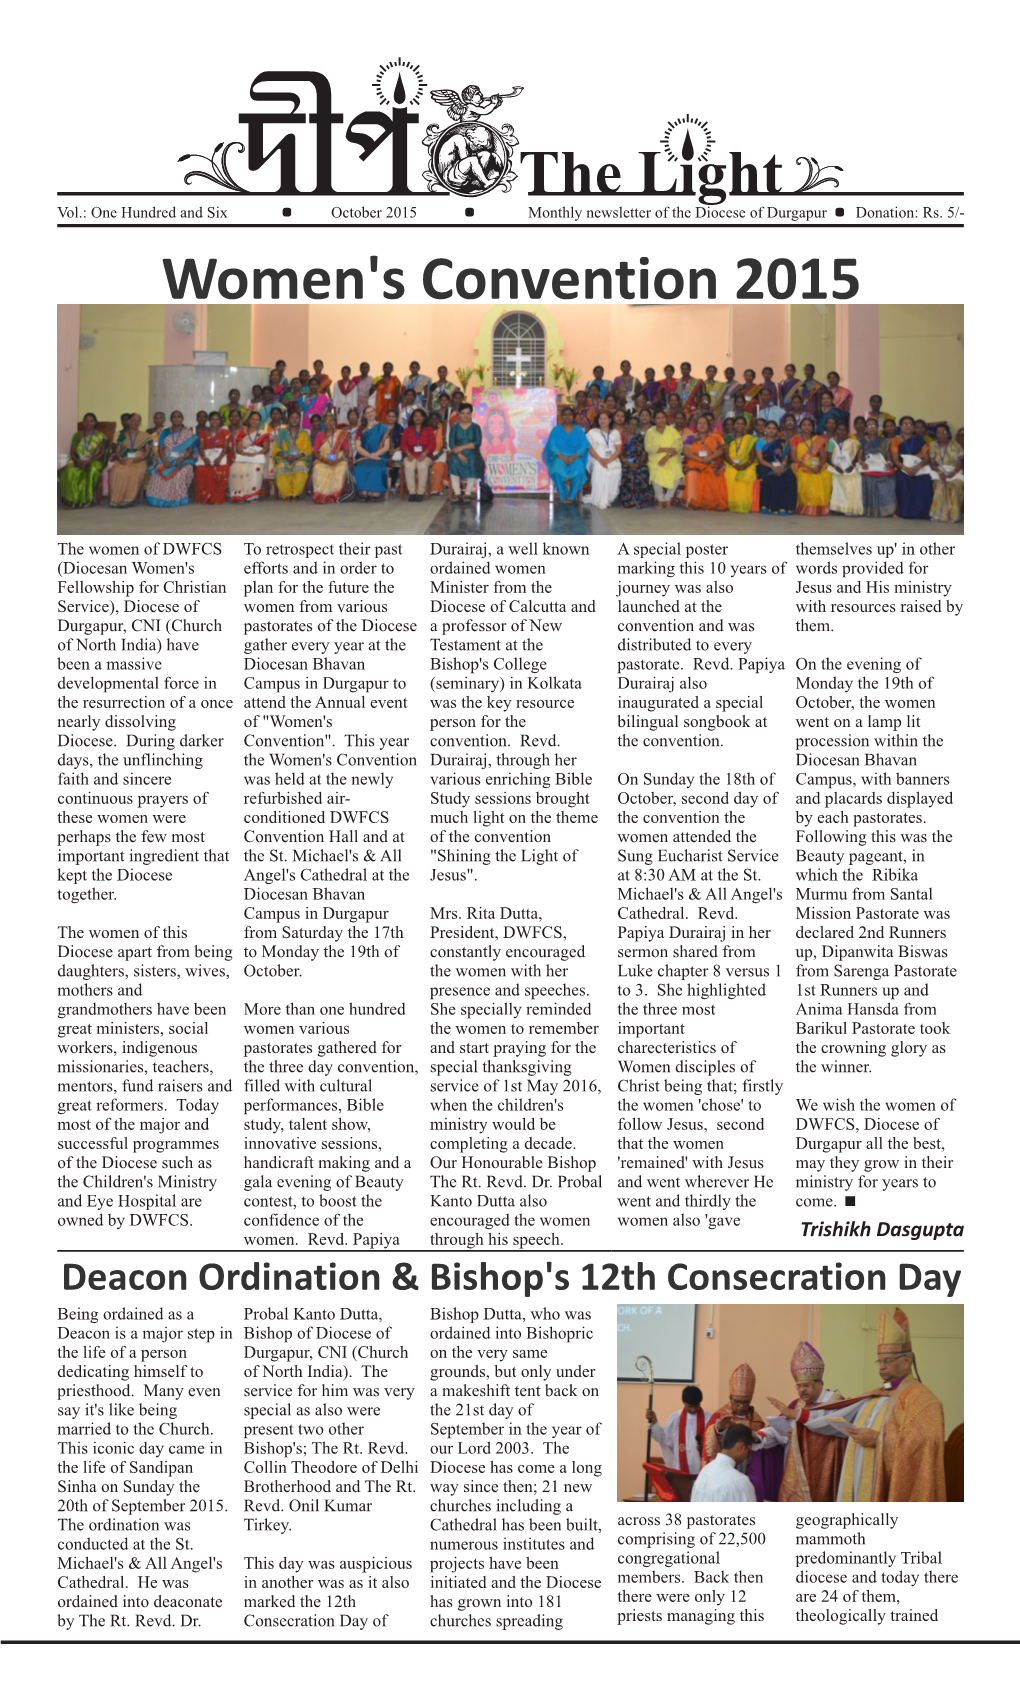 Women's Convention 2015